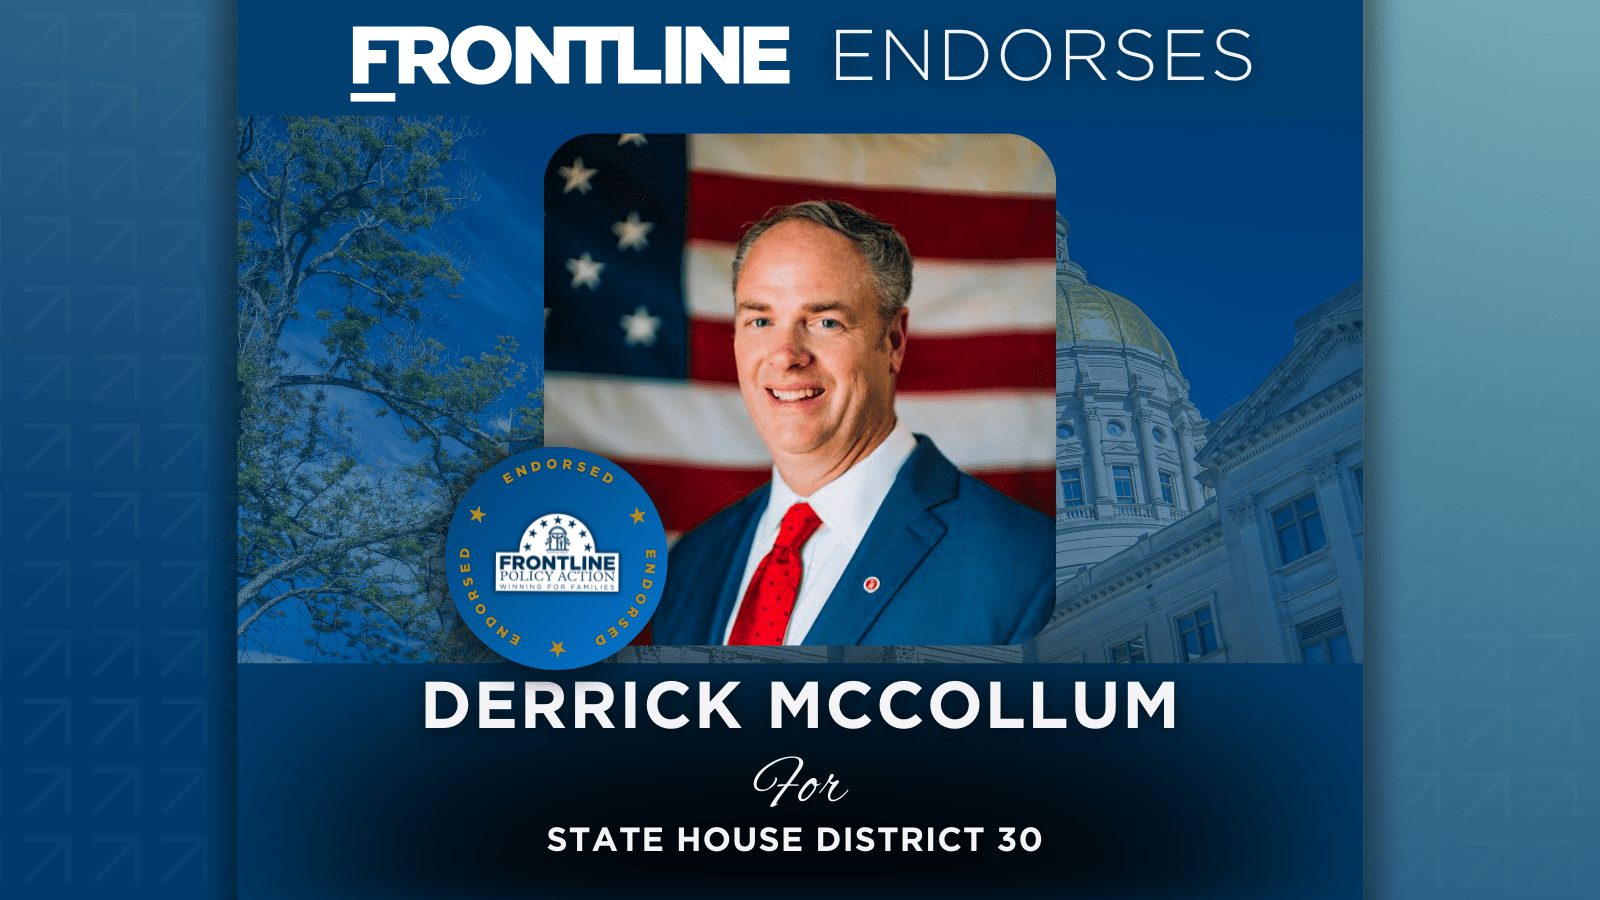 BREAKING: Frontline Endorses Derrick McCollum for State House District 30